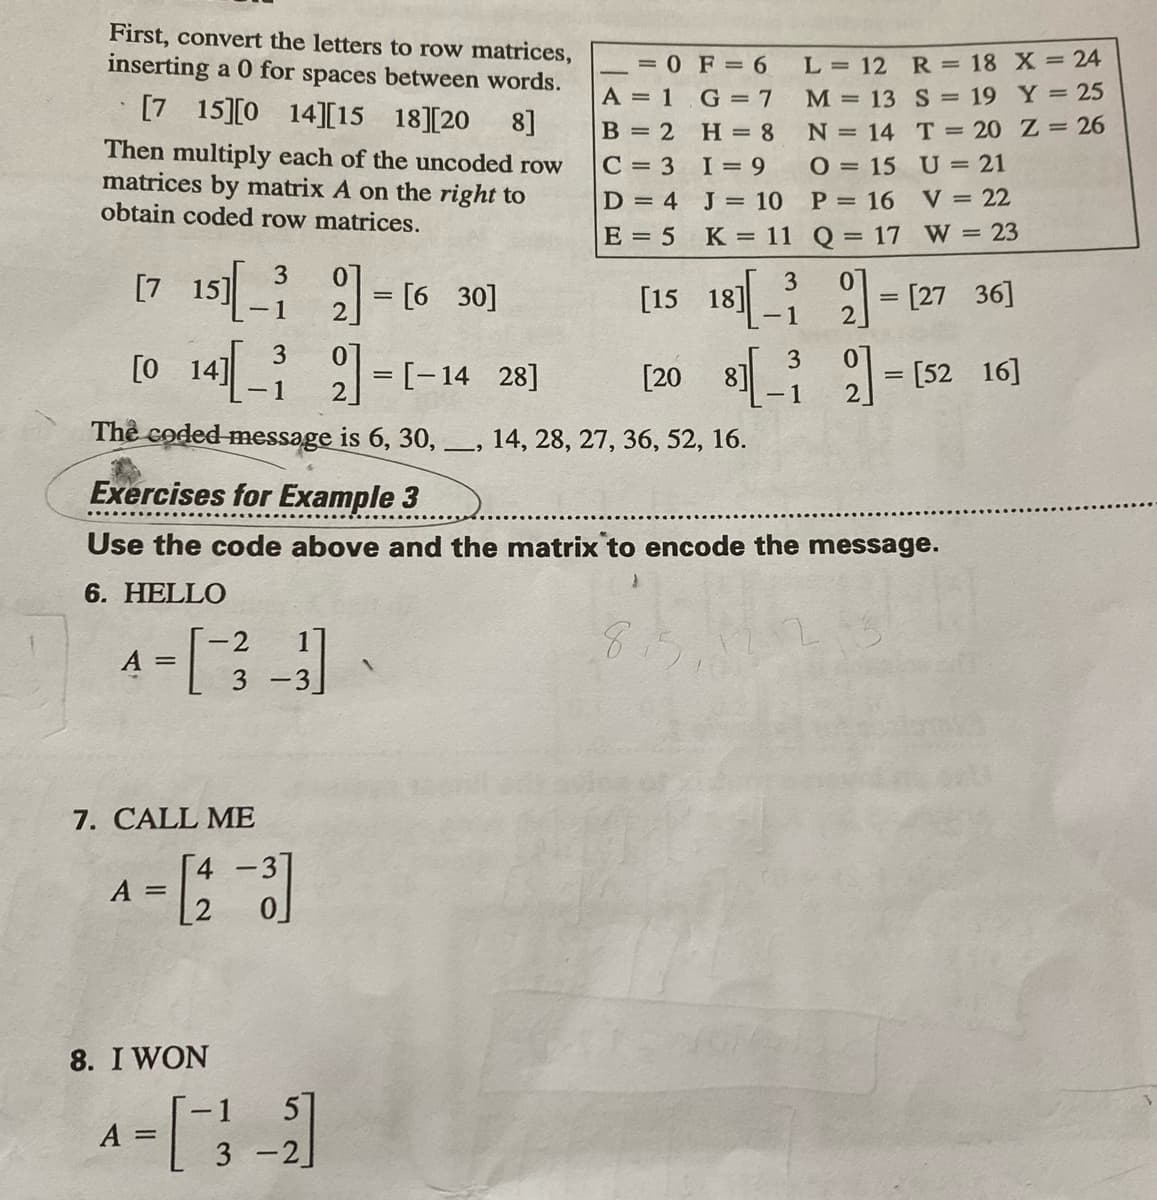 First, convert the letters to row matrices,
inserting a 0 for spaces between words.
= 0 F = 6
A = 1 G = 7
L = 12 R = 18 X = 24
[7 15][0
M = 13 S = 19 Y = 25
N = 14 T = 20 Z = 26
14][15
18][20
8]
B = 2
H = 8
C = 3 I= 9
Then multiply each of the uncoded row
matrices by matrix A on the right to
obtain coded row matrices.
O = 15 U = 21
V = 22
D = 4 J = 10
P = 16
E = 5
K = 11 Q = 17 W = 23
[7 15 - (6 30]
[15 18] -(27 36]
= [27
2
3
14] 1=[-14 28]
3
[20 8] - [52 16]
-1
-1
The coded message is 6, 30,-
14, 28, 27, 36, 52, 16.
Exercises for Example 3
Use the code above and the matrix to encode the message.
6. HELLO
8.
-2
A
3 -3
7. CALL ME
4 -3]
A =
[2
8. I WON
-1
51
A =
3
